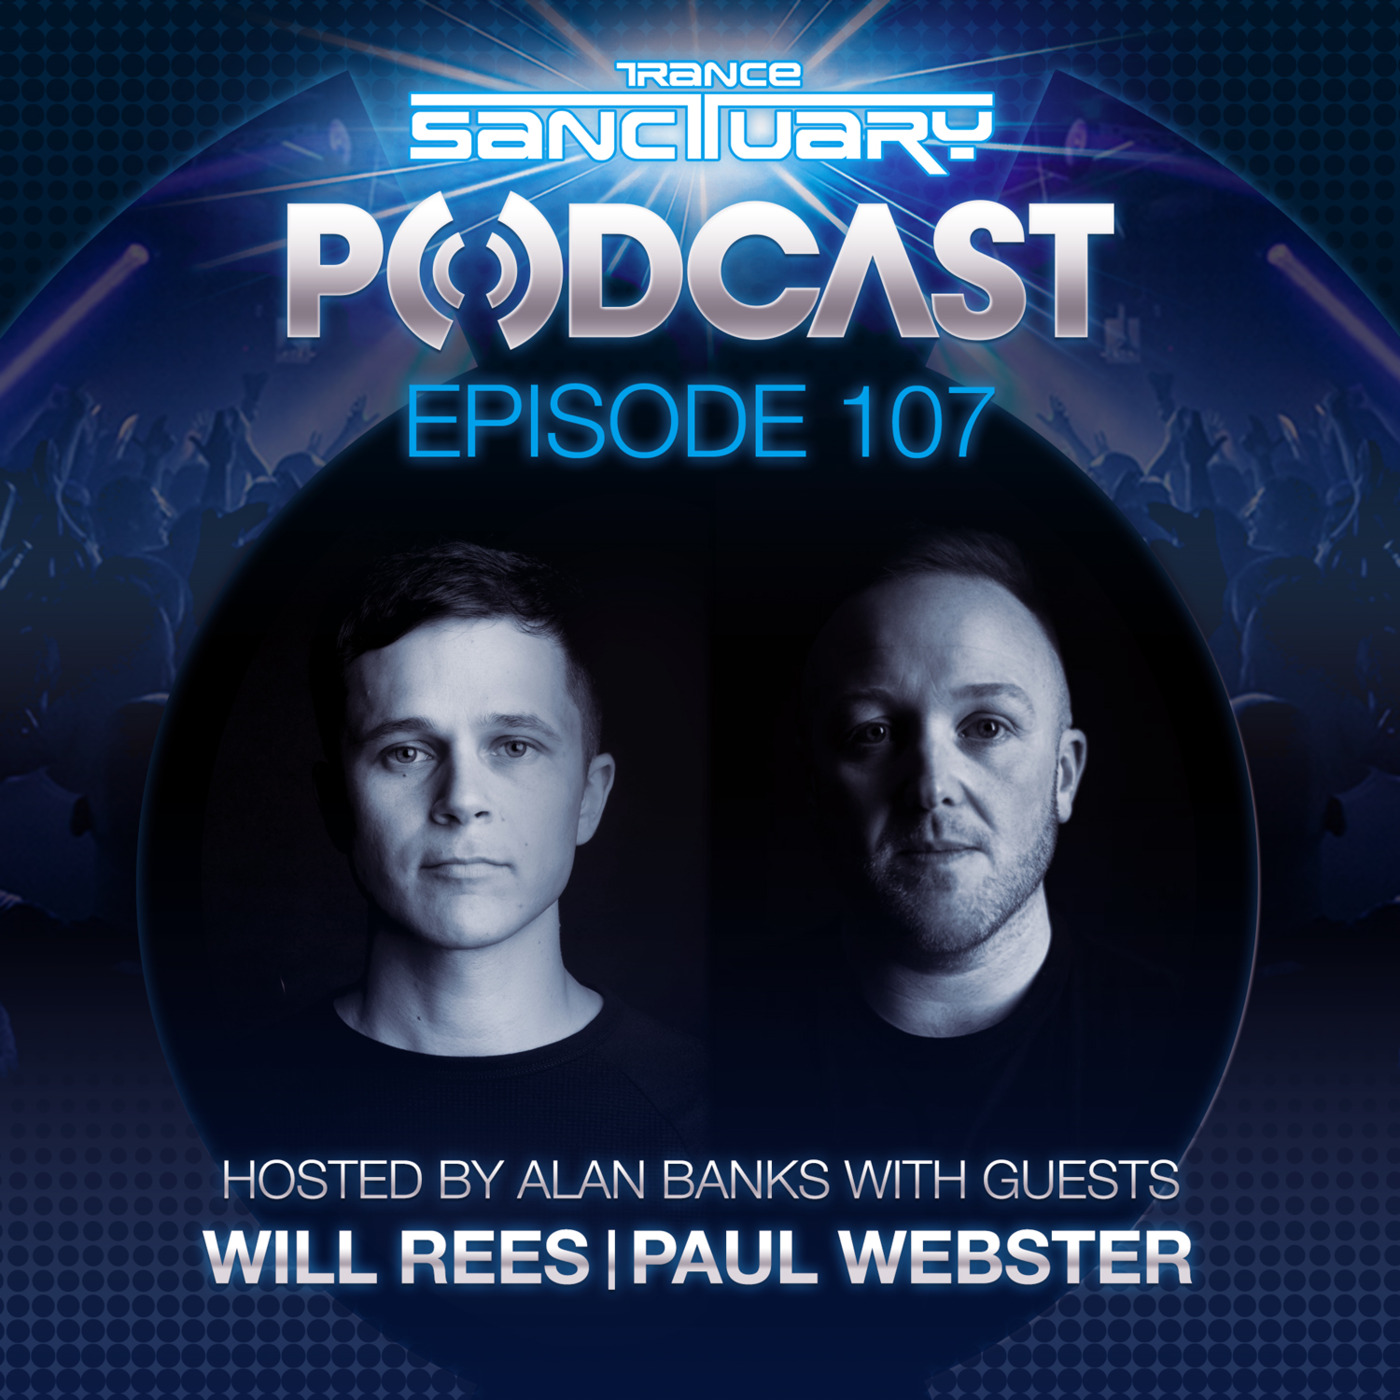 Episode 107: Trance Sanctuary Podcast 107 with Will Rees and Paul Webster